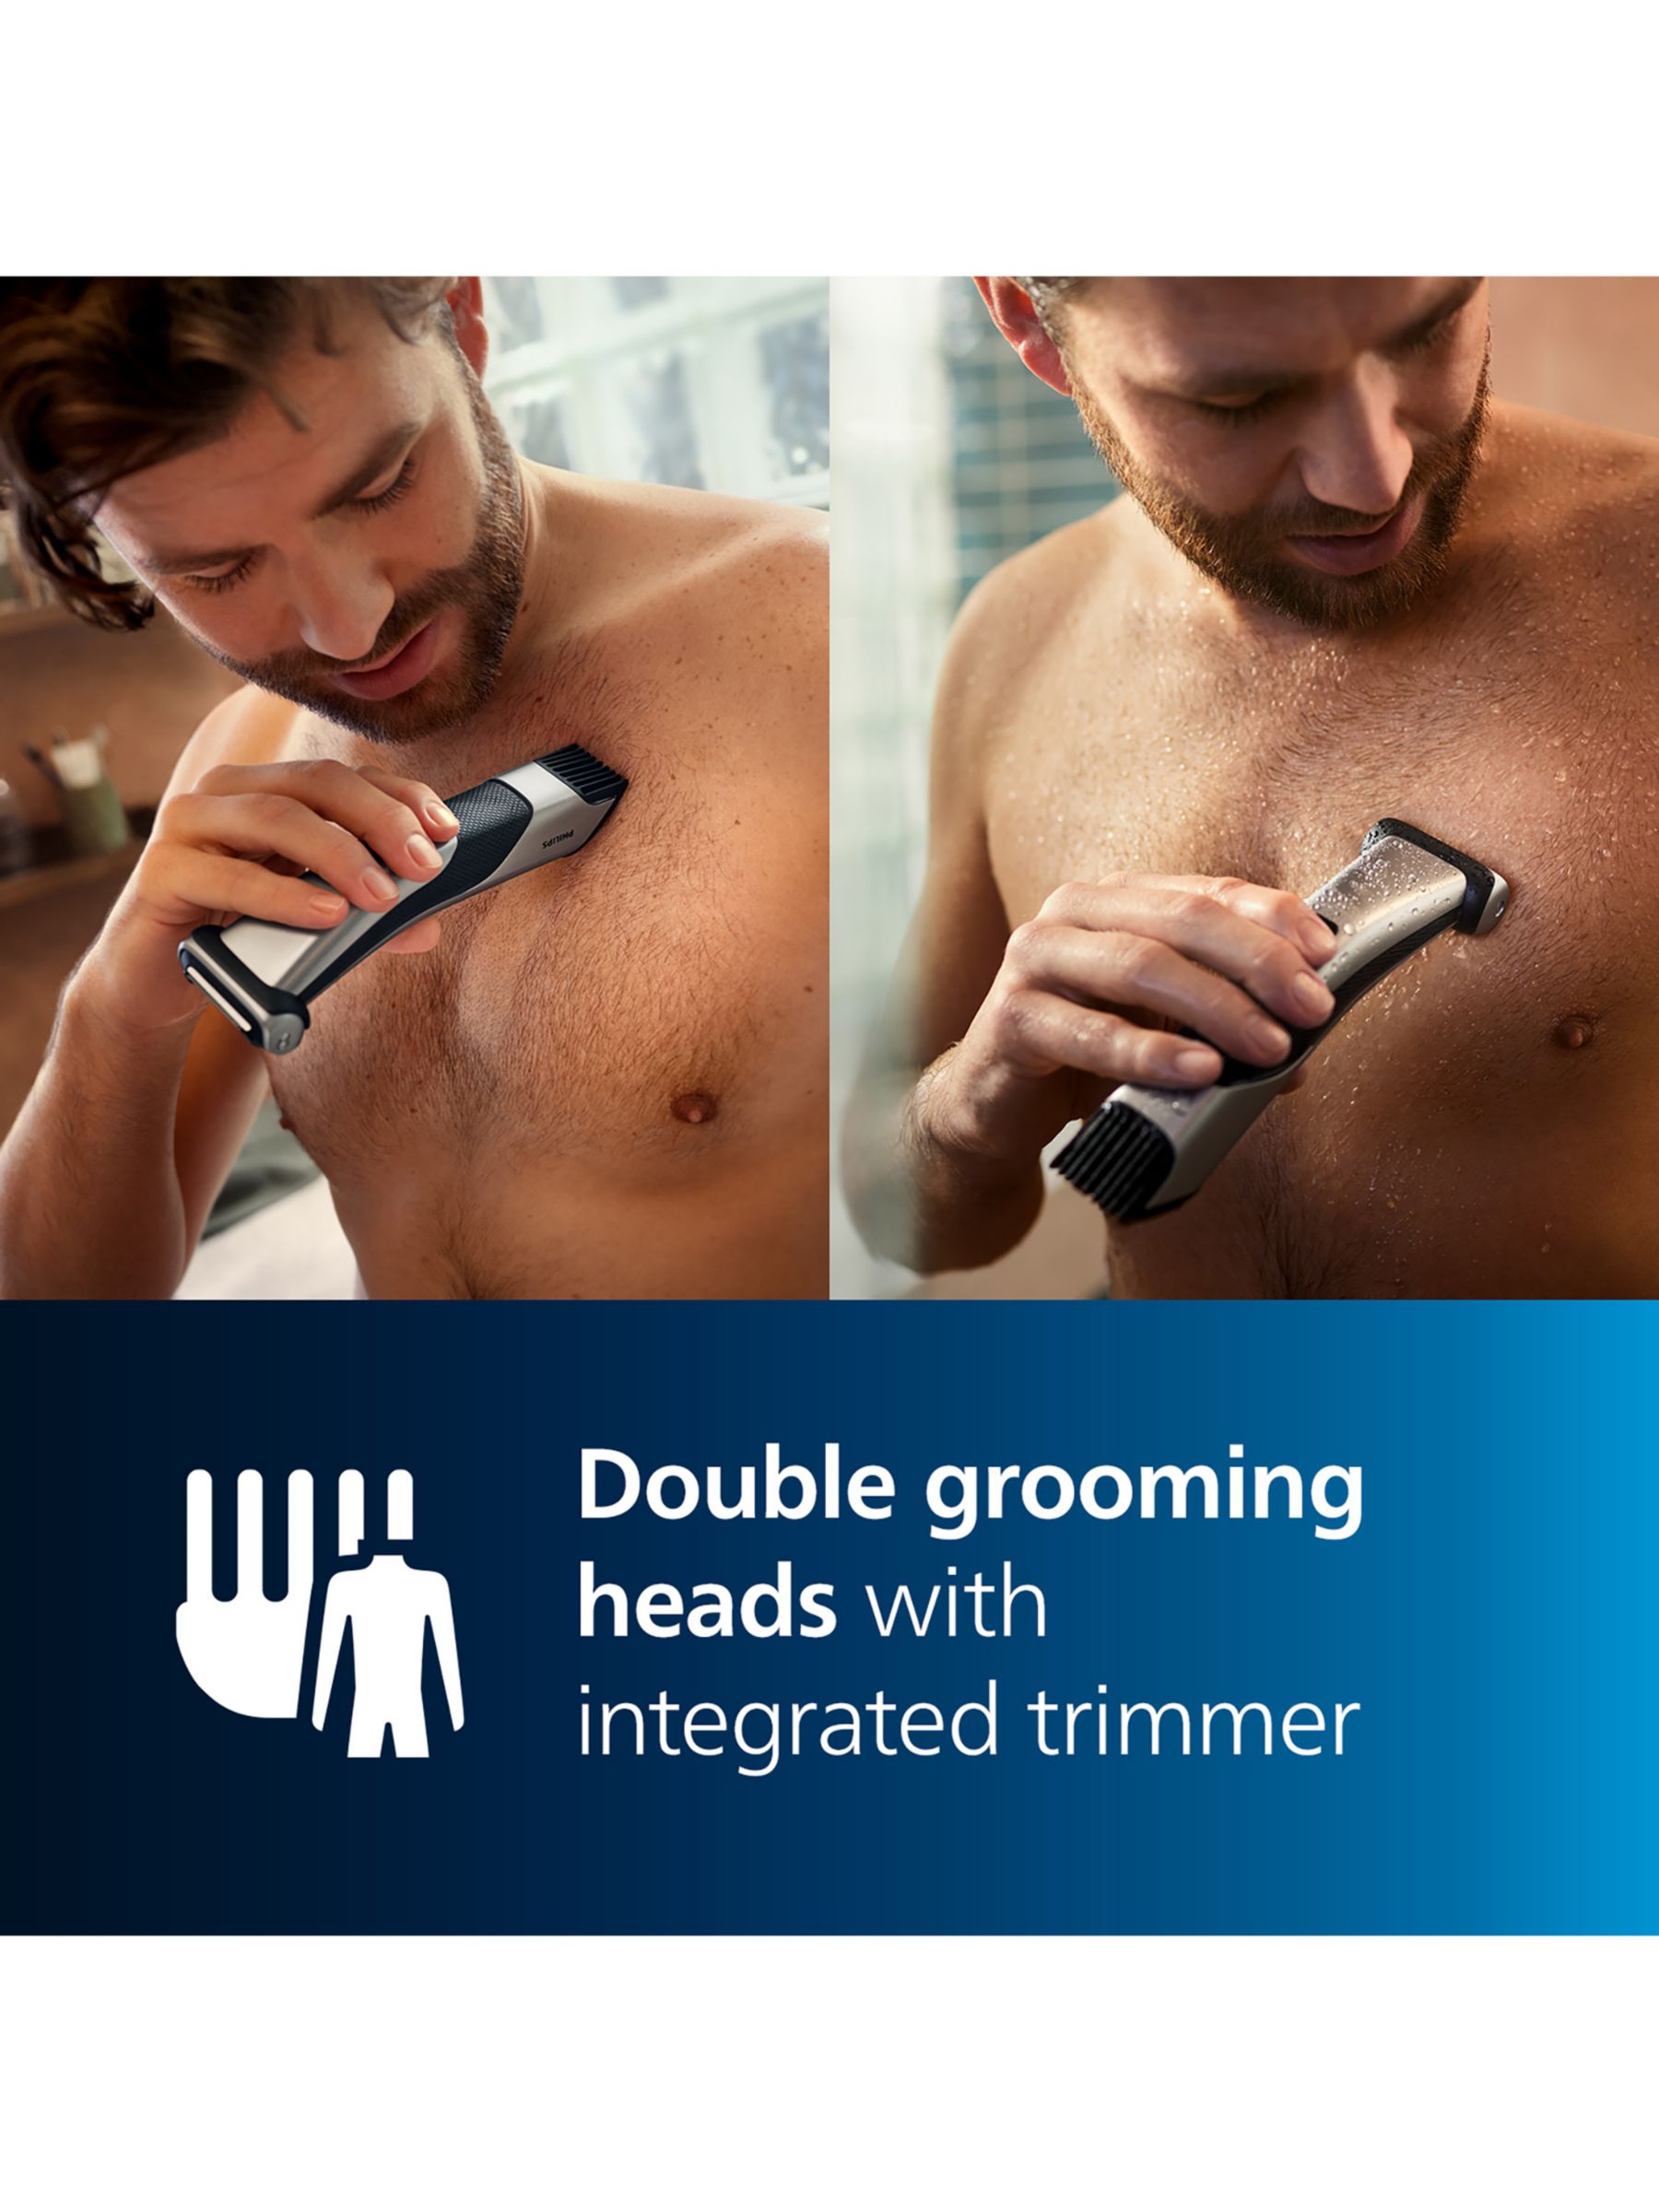 philips norelco bodygroom series 7000 review